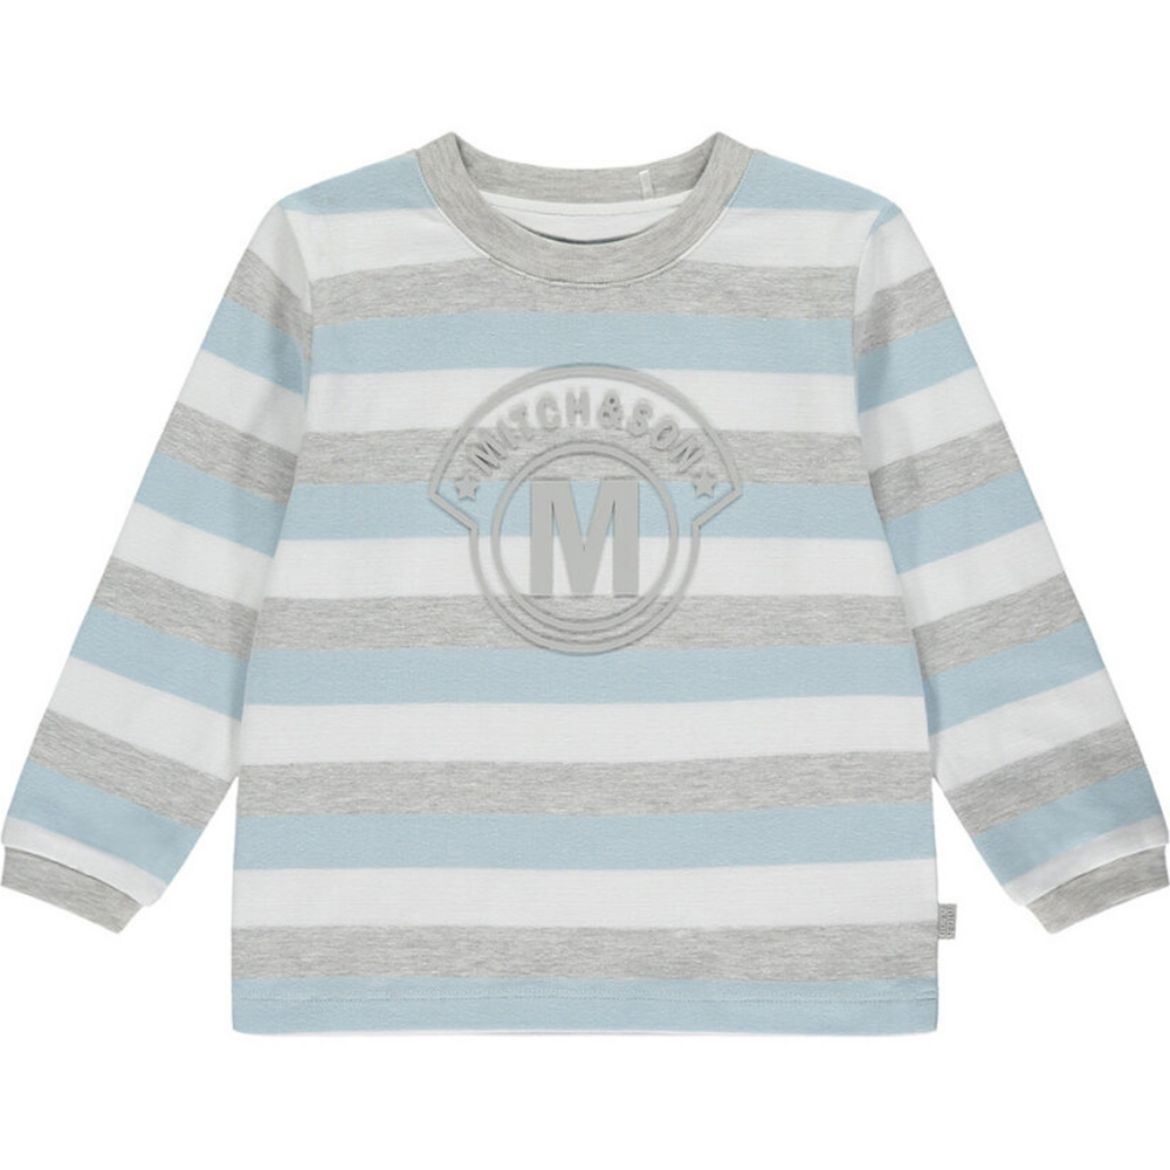 Picture of Mitch & Son Boys 'Nile' Grey Stripe Top